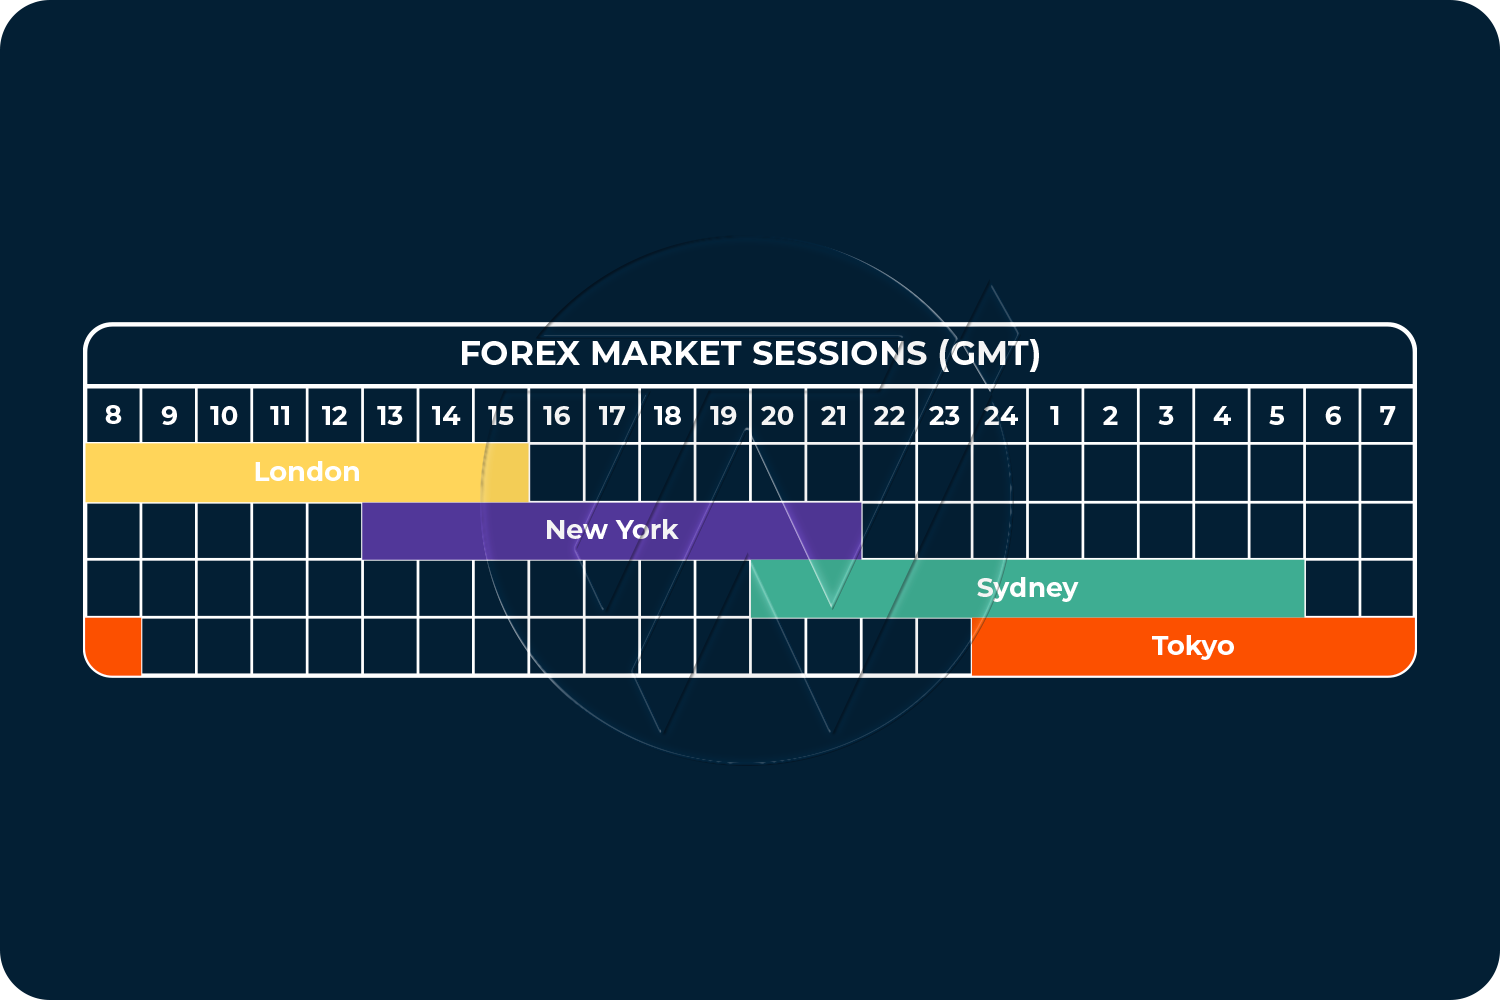 Forex market open times table showing major market open times in GMT